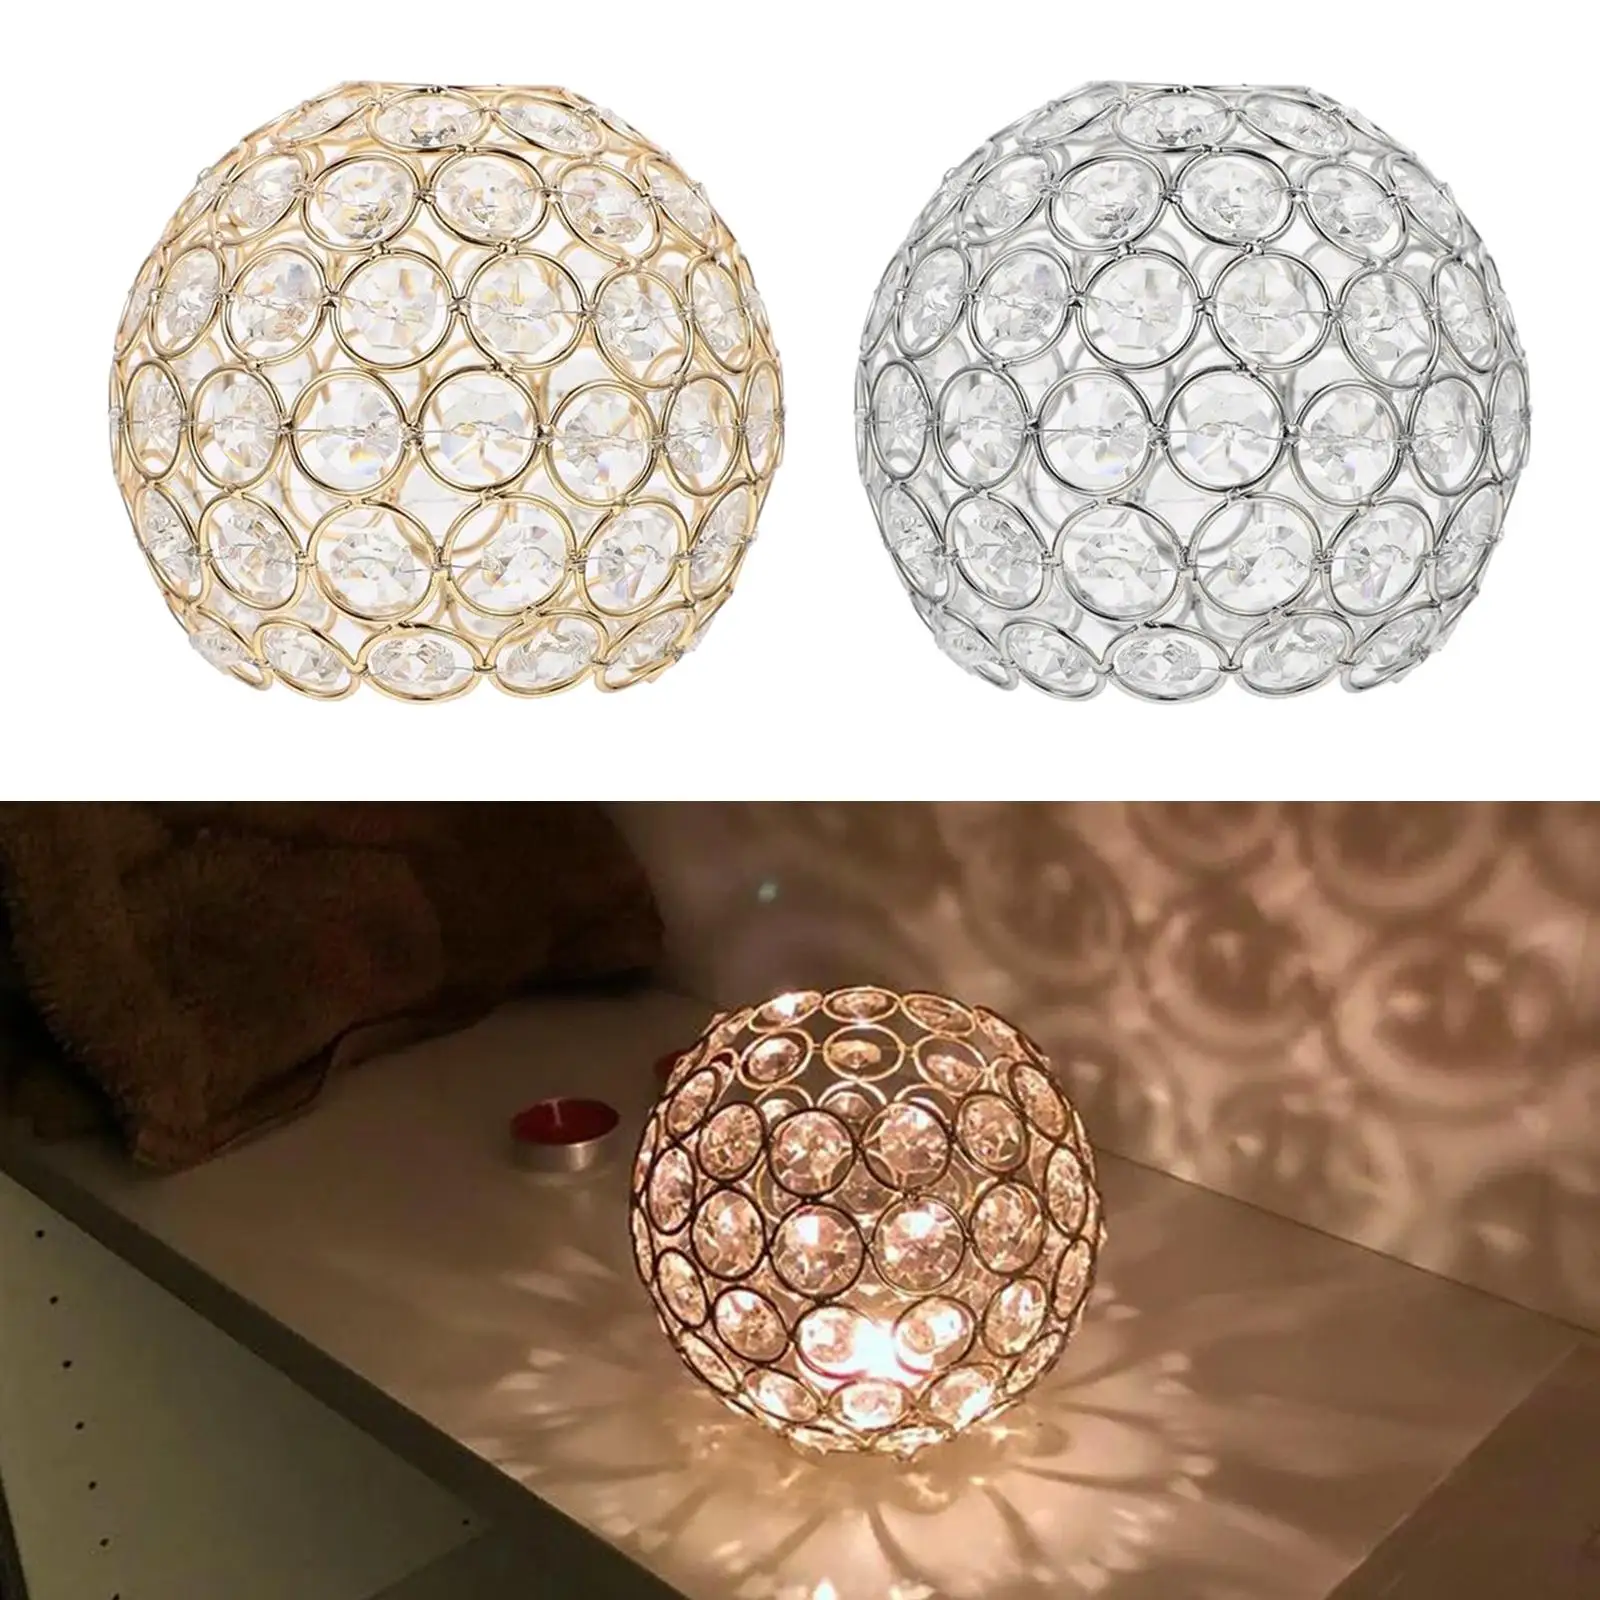 Clip On Ceiling Light Shade Replacement Cover Hand Crafted Crystal Lampshade for Bedside Lamp Reading Lamp Bedroom Office Party